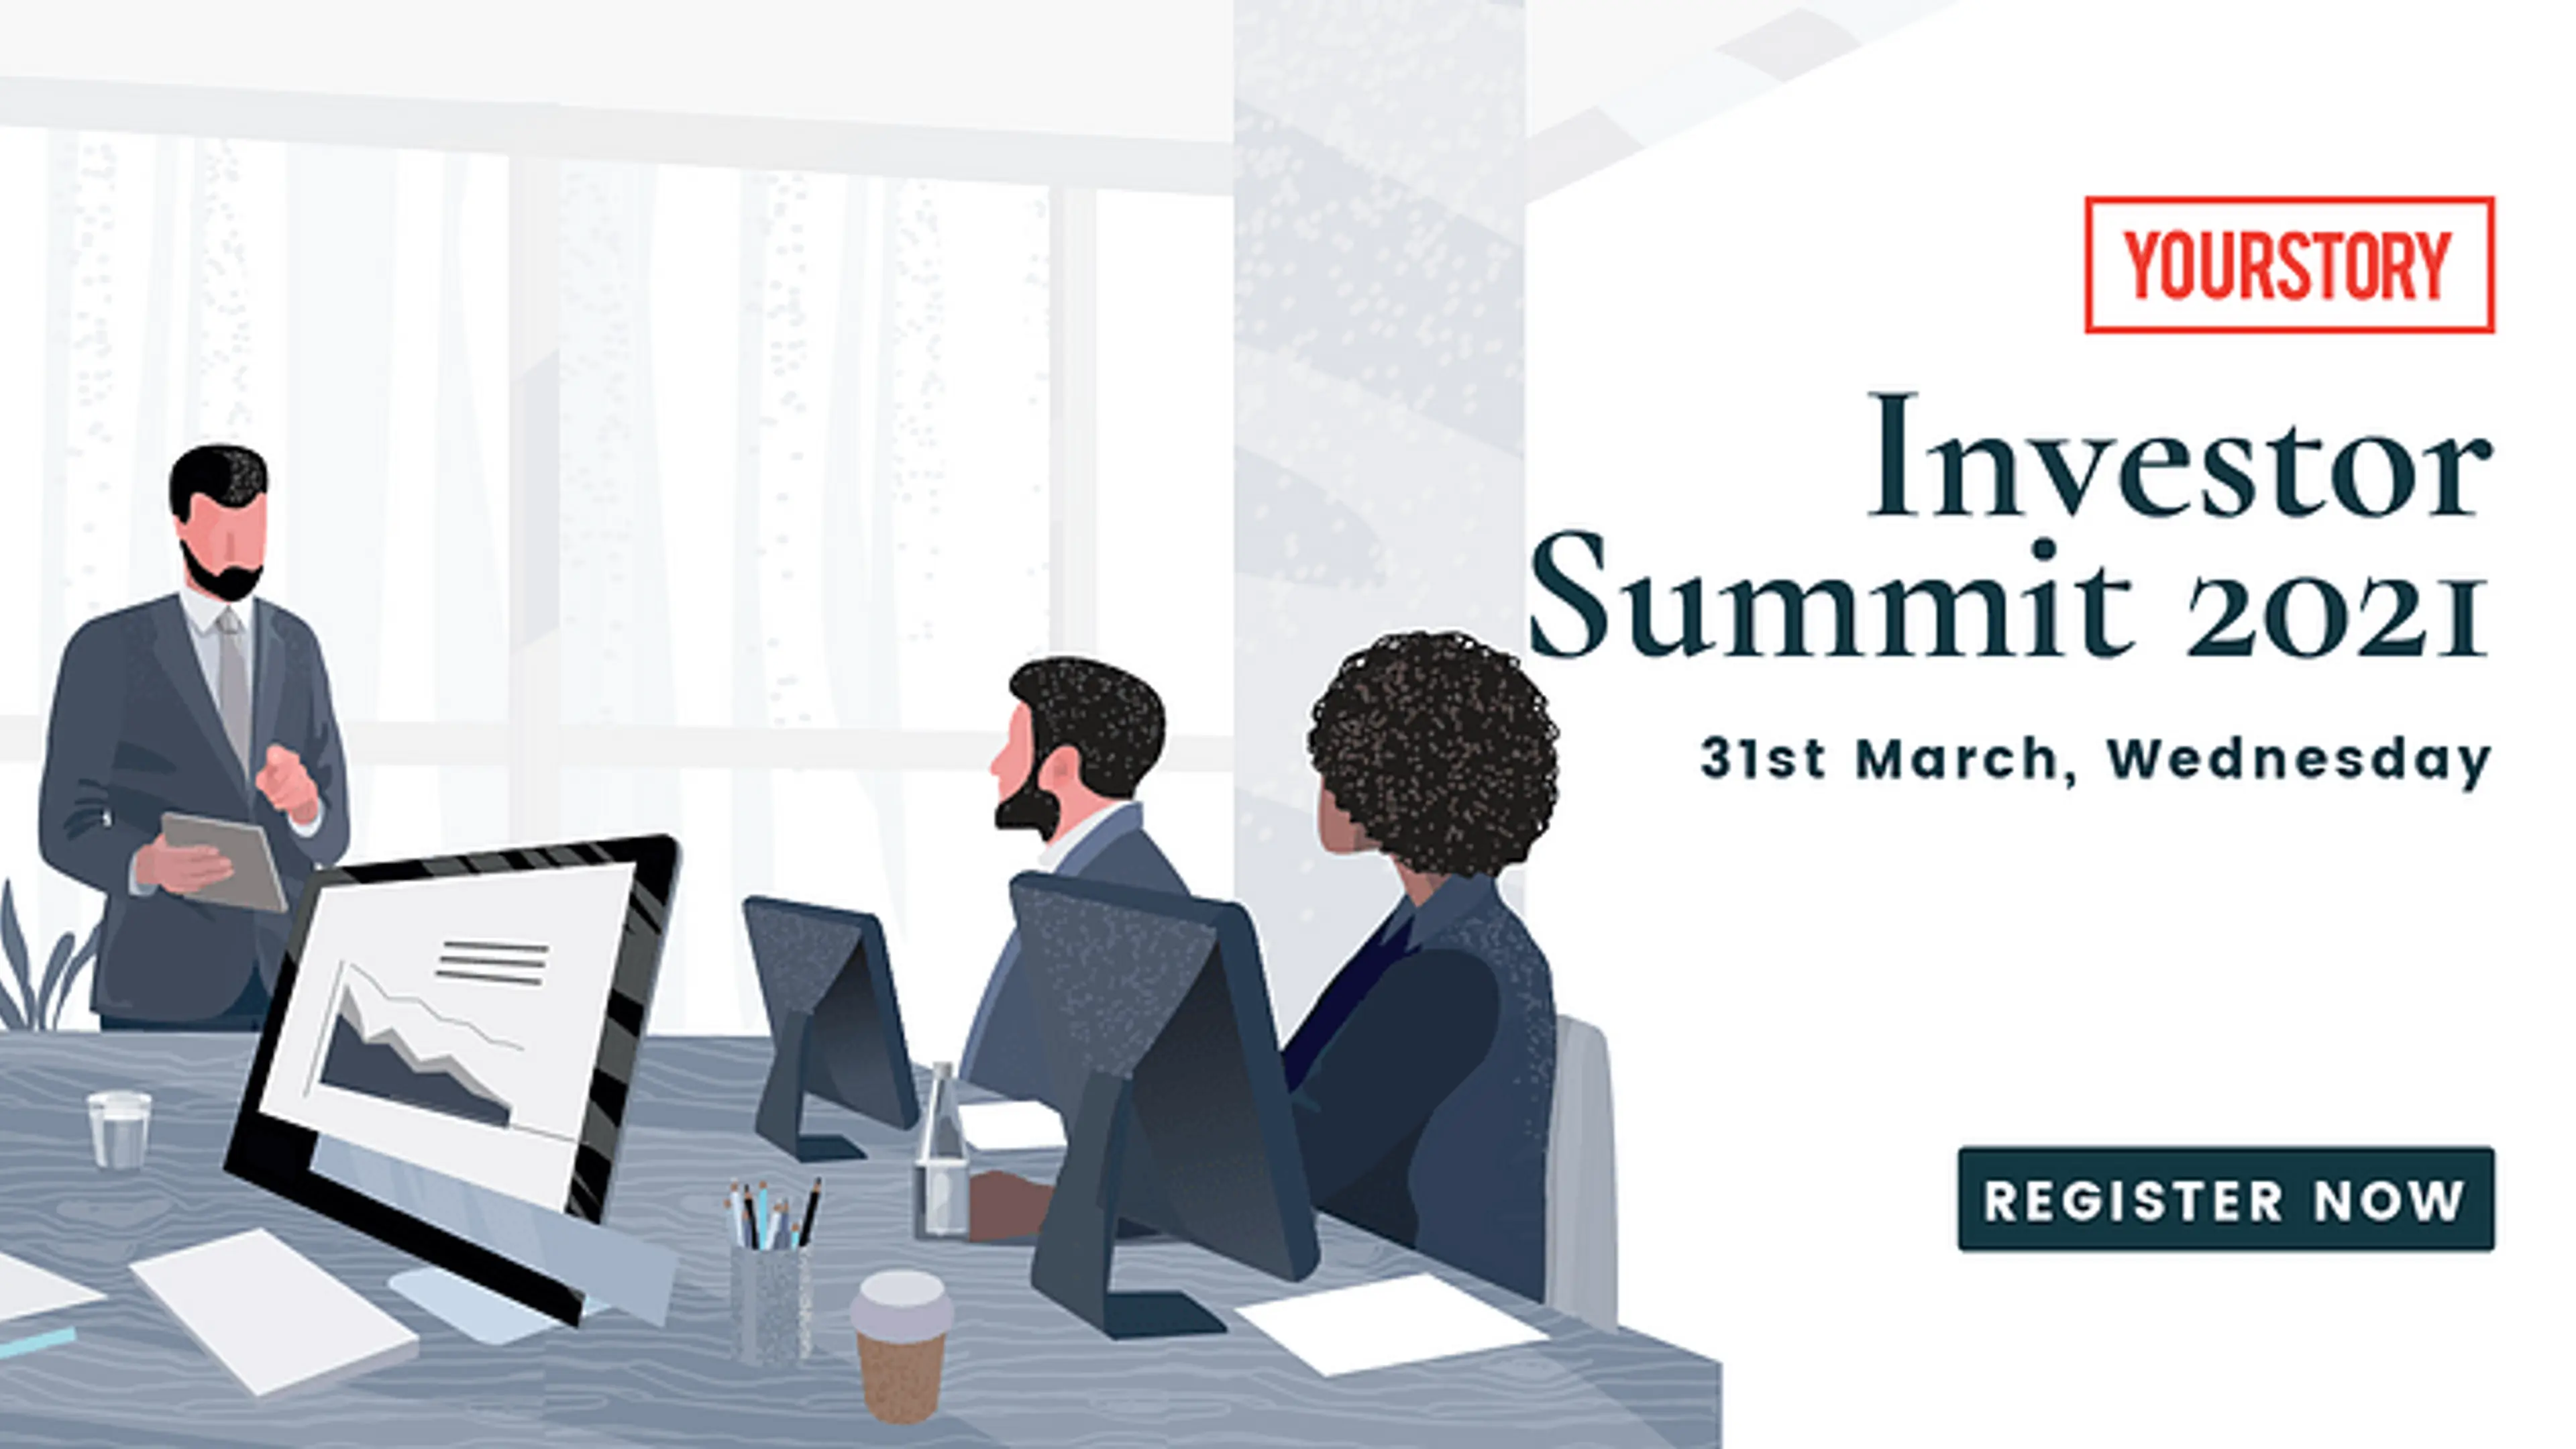 Get insights on funding and connect with investors from home at YourStory’s Investor Summit